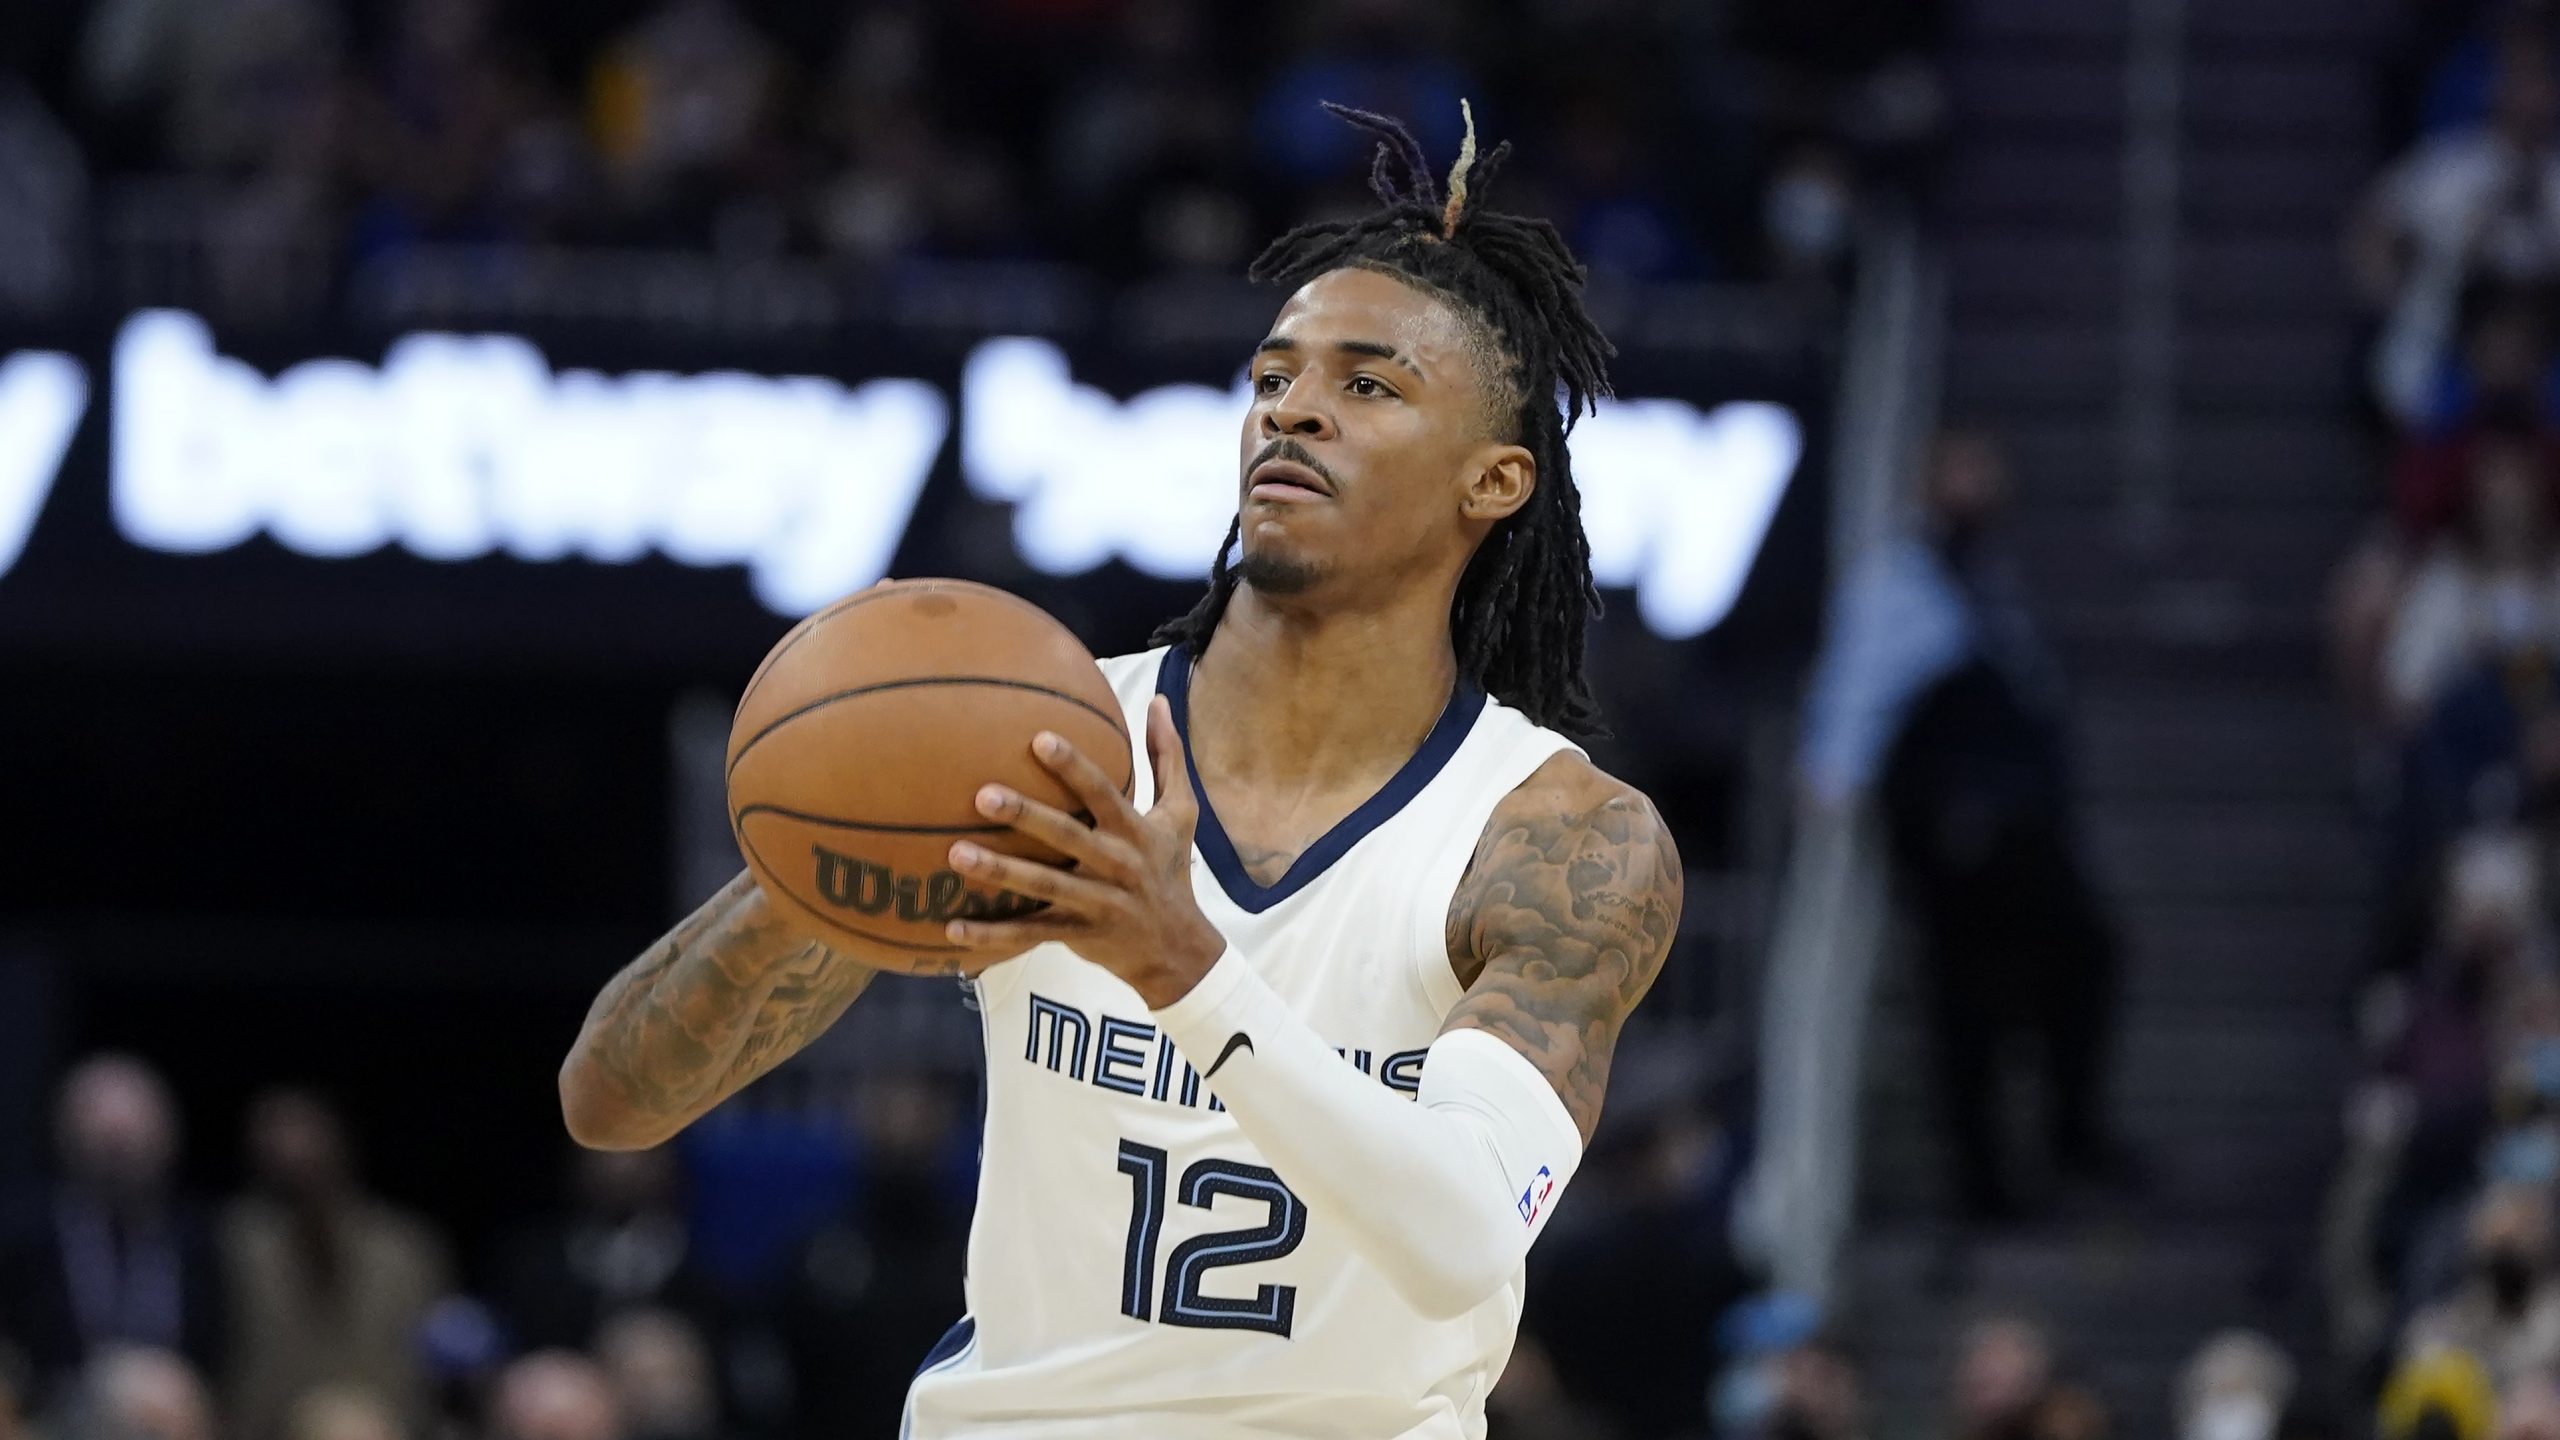 Memphis Grizzlies guard Ja Morant against the Golden State Warriors during an NBA basketball game in San Francisco, Thursday, Dec. 23, 2021